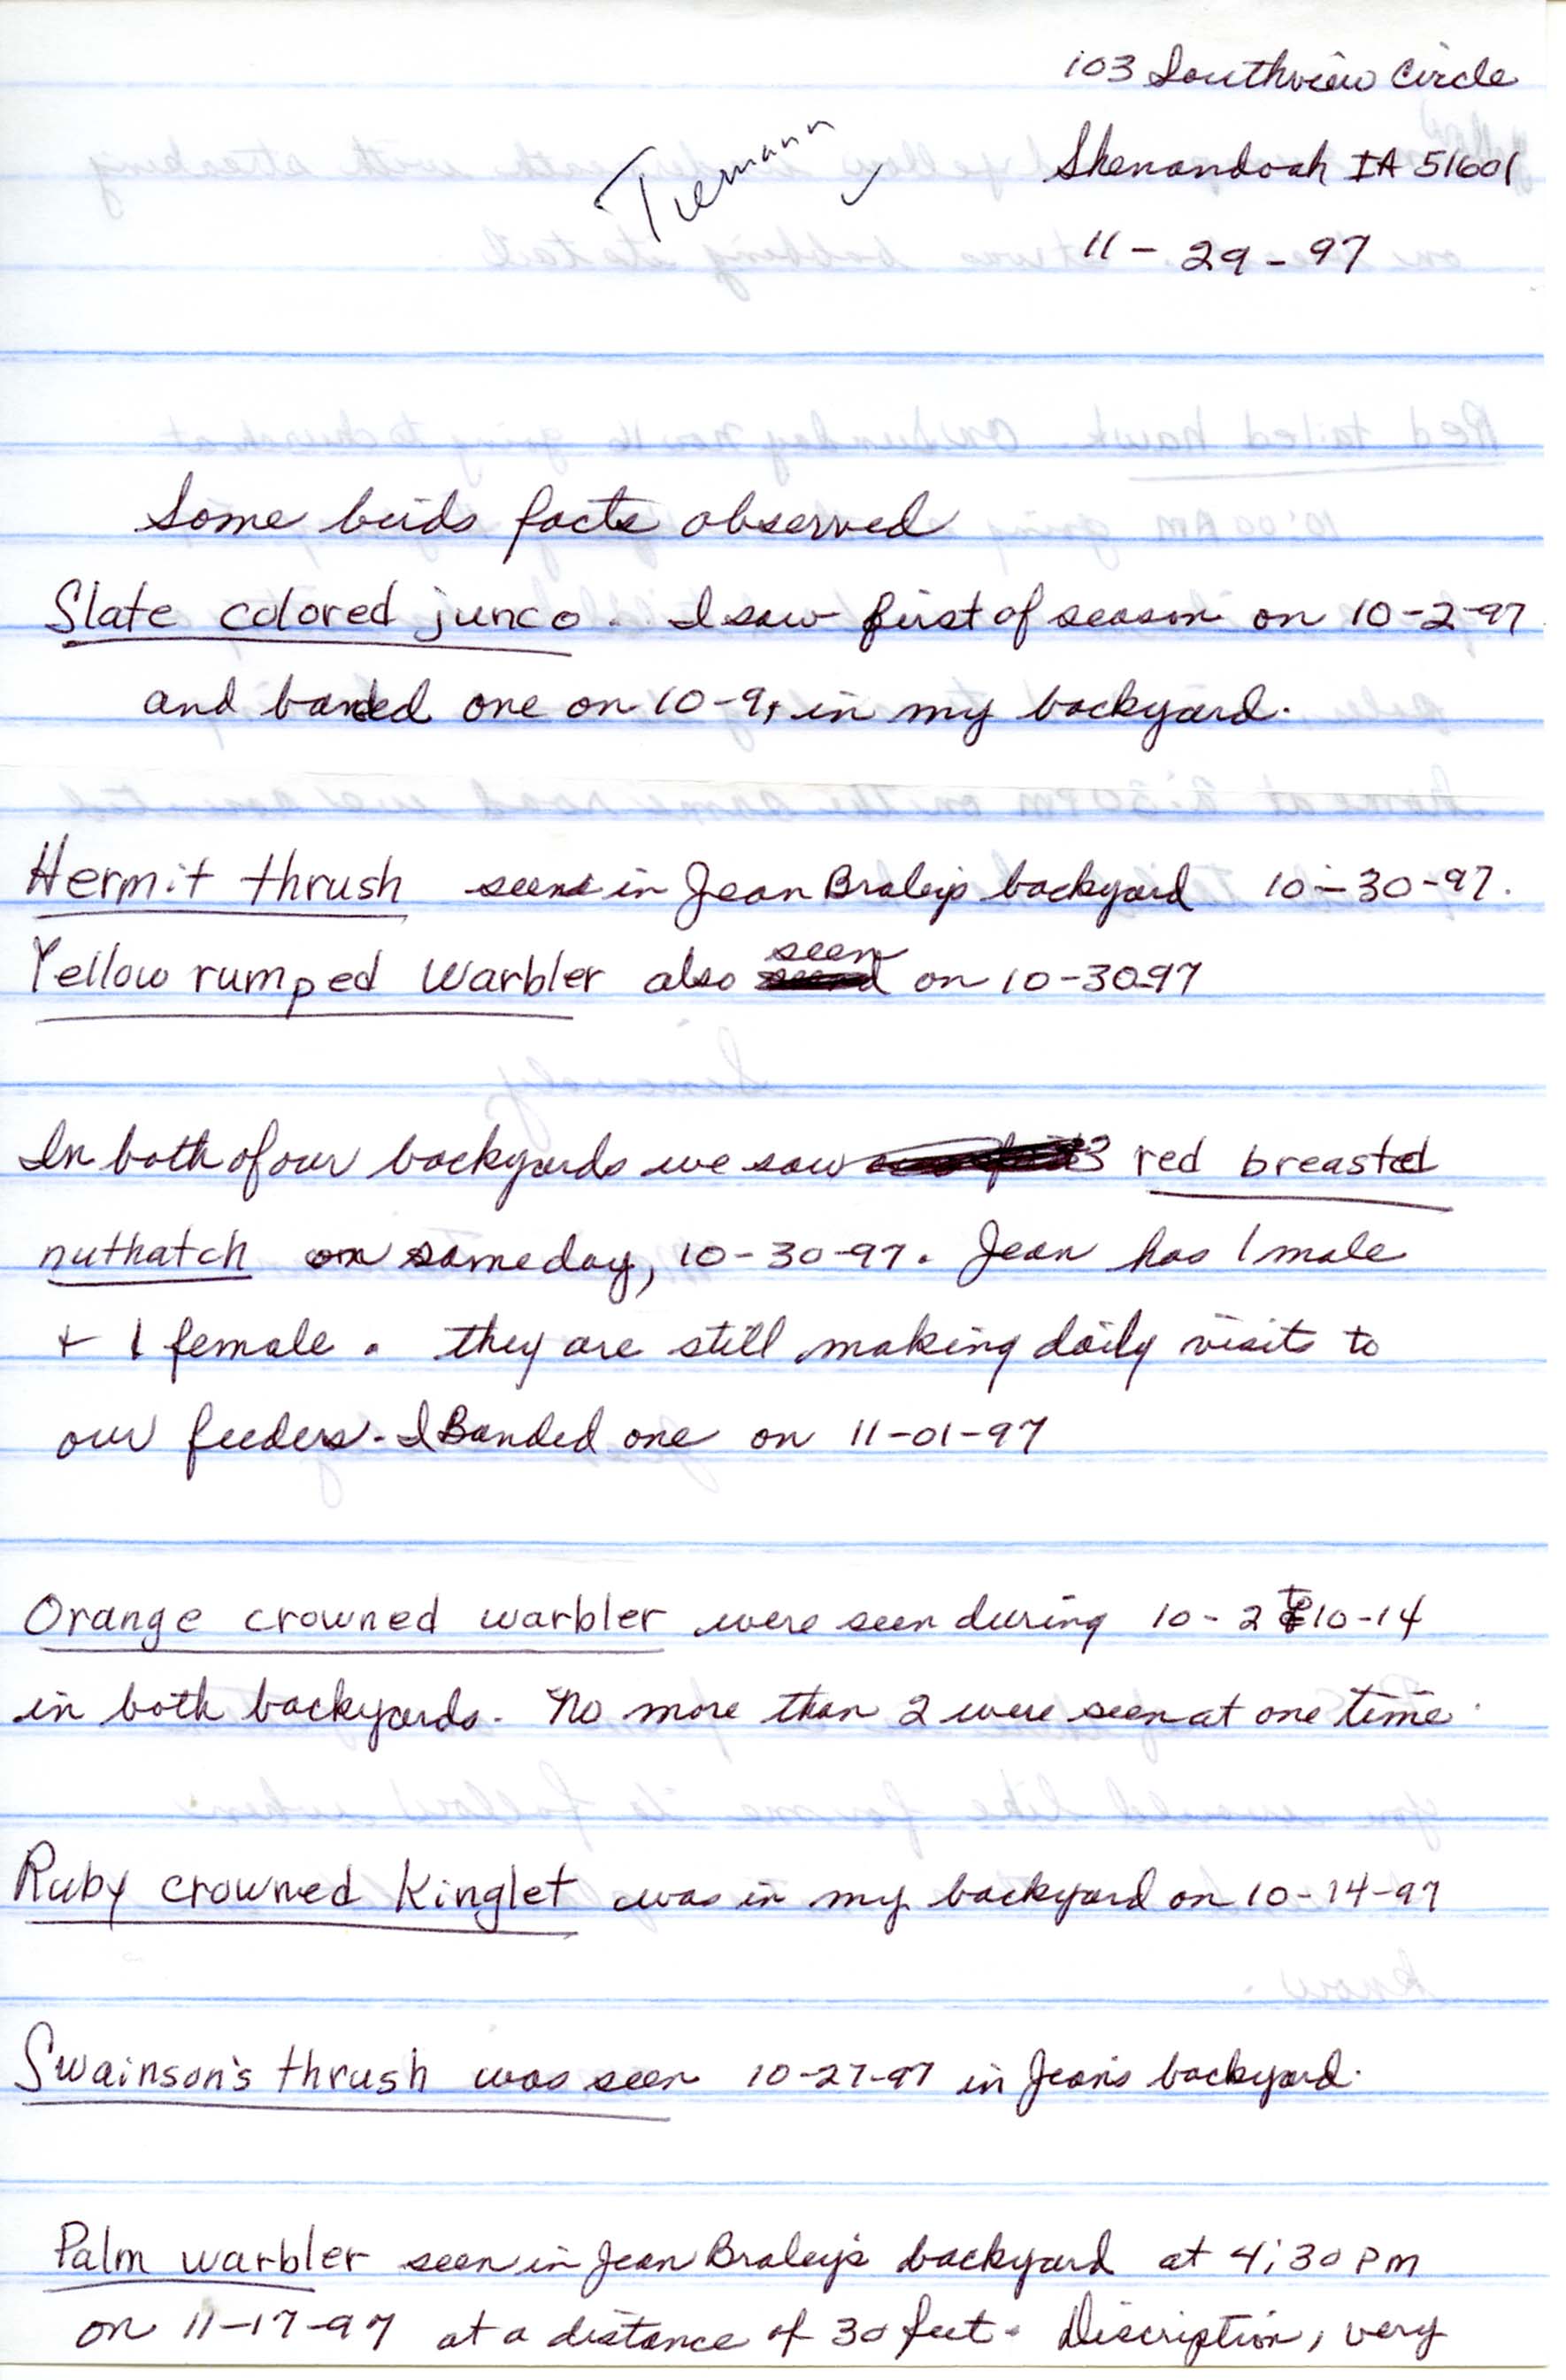 Field notes contributed by Marie E. Spears Tiemann and Jean B. Braley, November 29, 1997